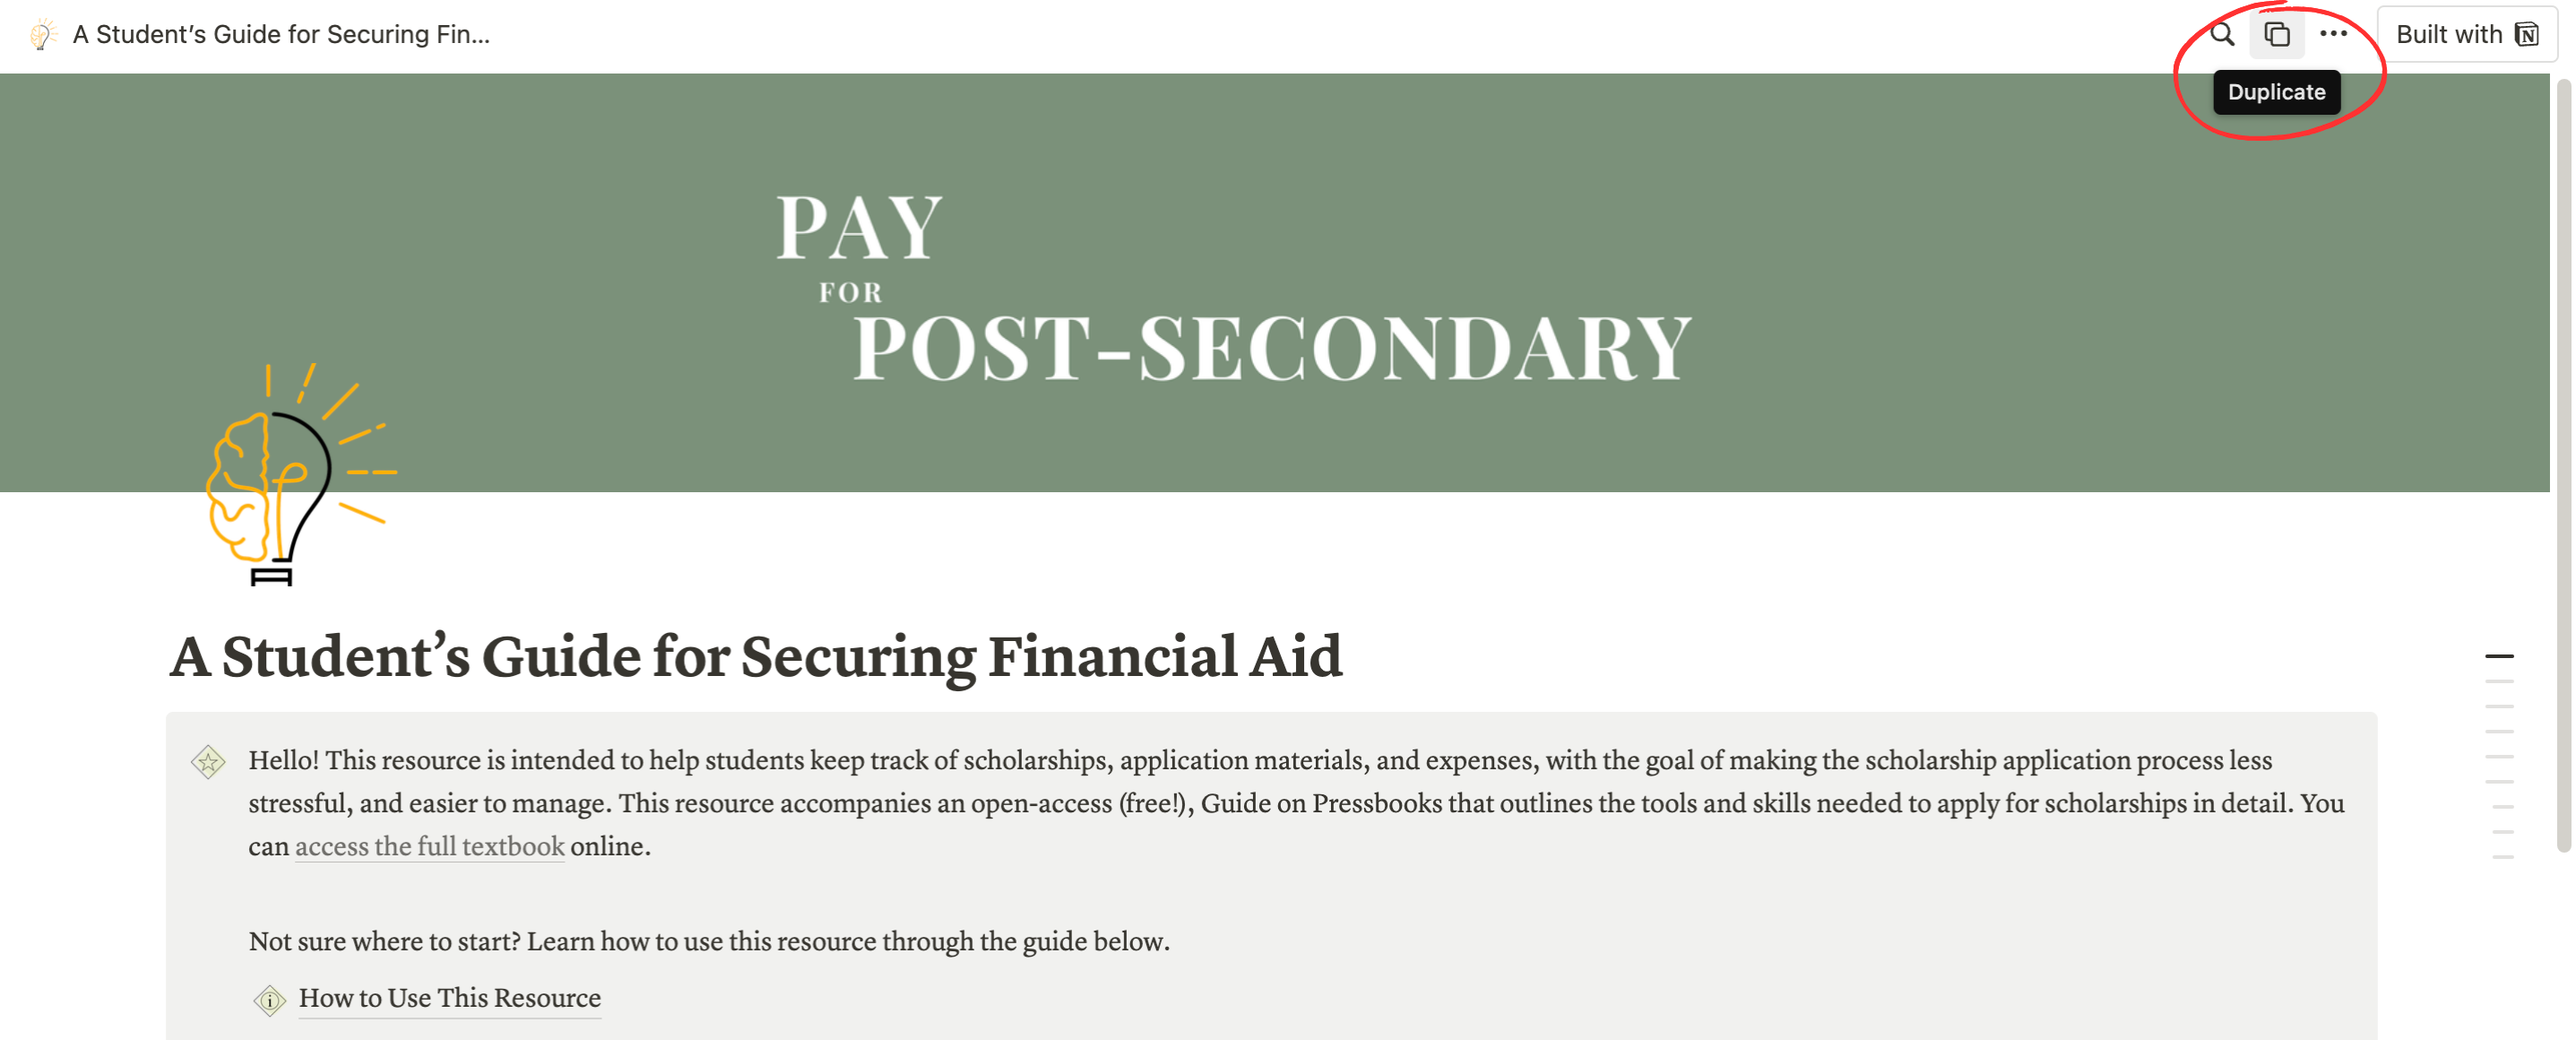 A screenshot of the Pay for Post-Secondary Notion Guide homepage with a red circle around the "duplicate" button in the top right corner.